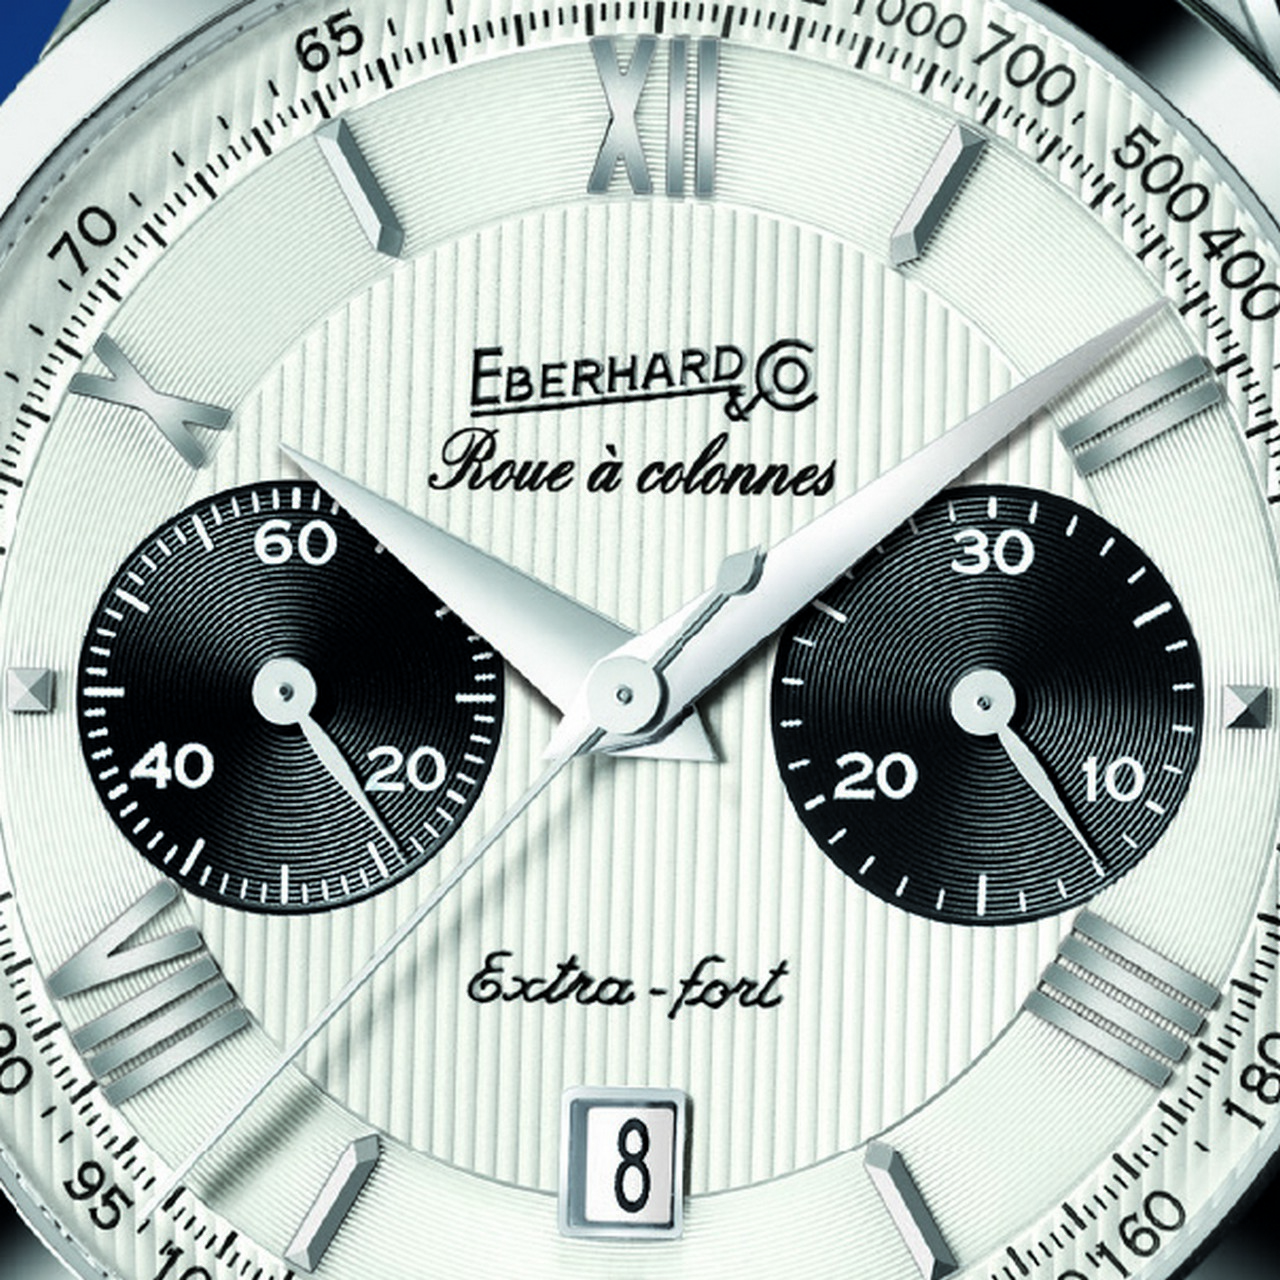 Orologio Eberhard & Co. Extra-fort Grande Taille Roue à Colonnes